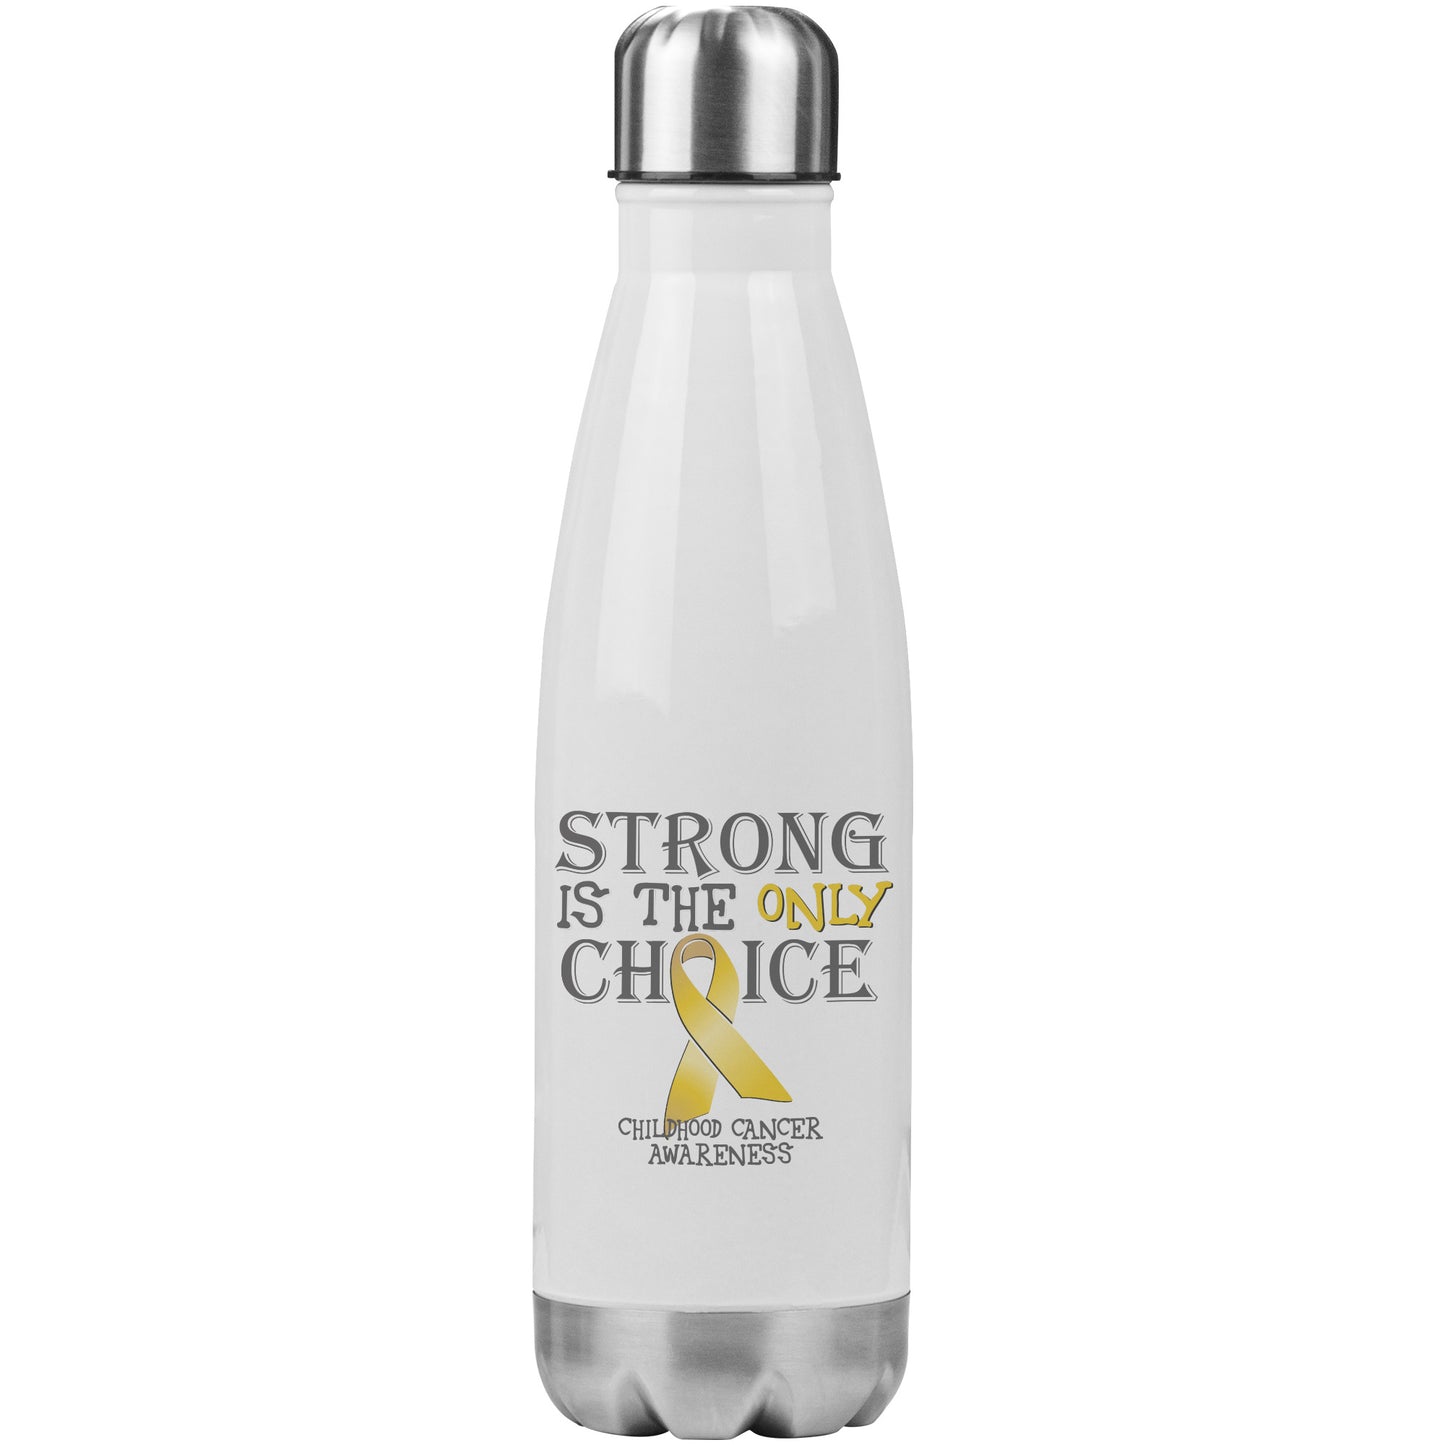 Strong is the Only Choice -Childhood Cancer Awareness 20oz Insulated Water Bottle